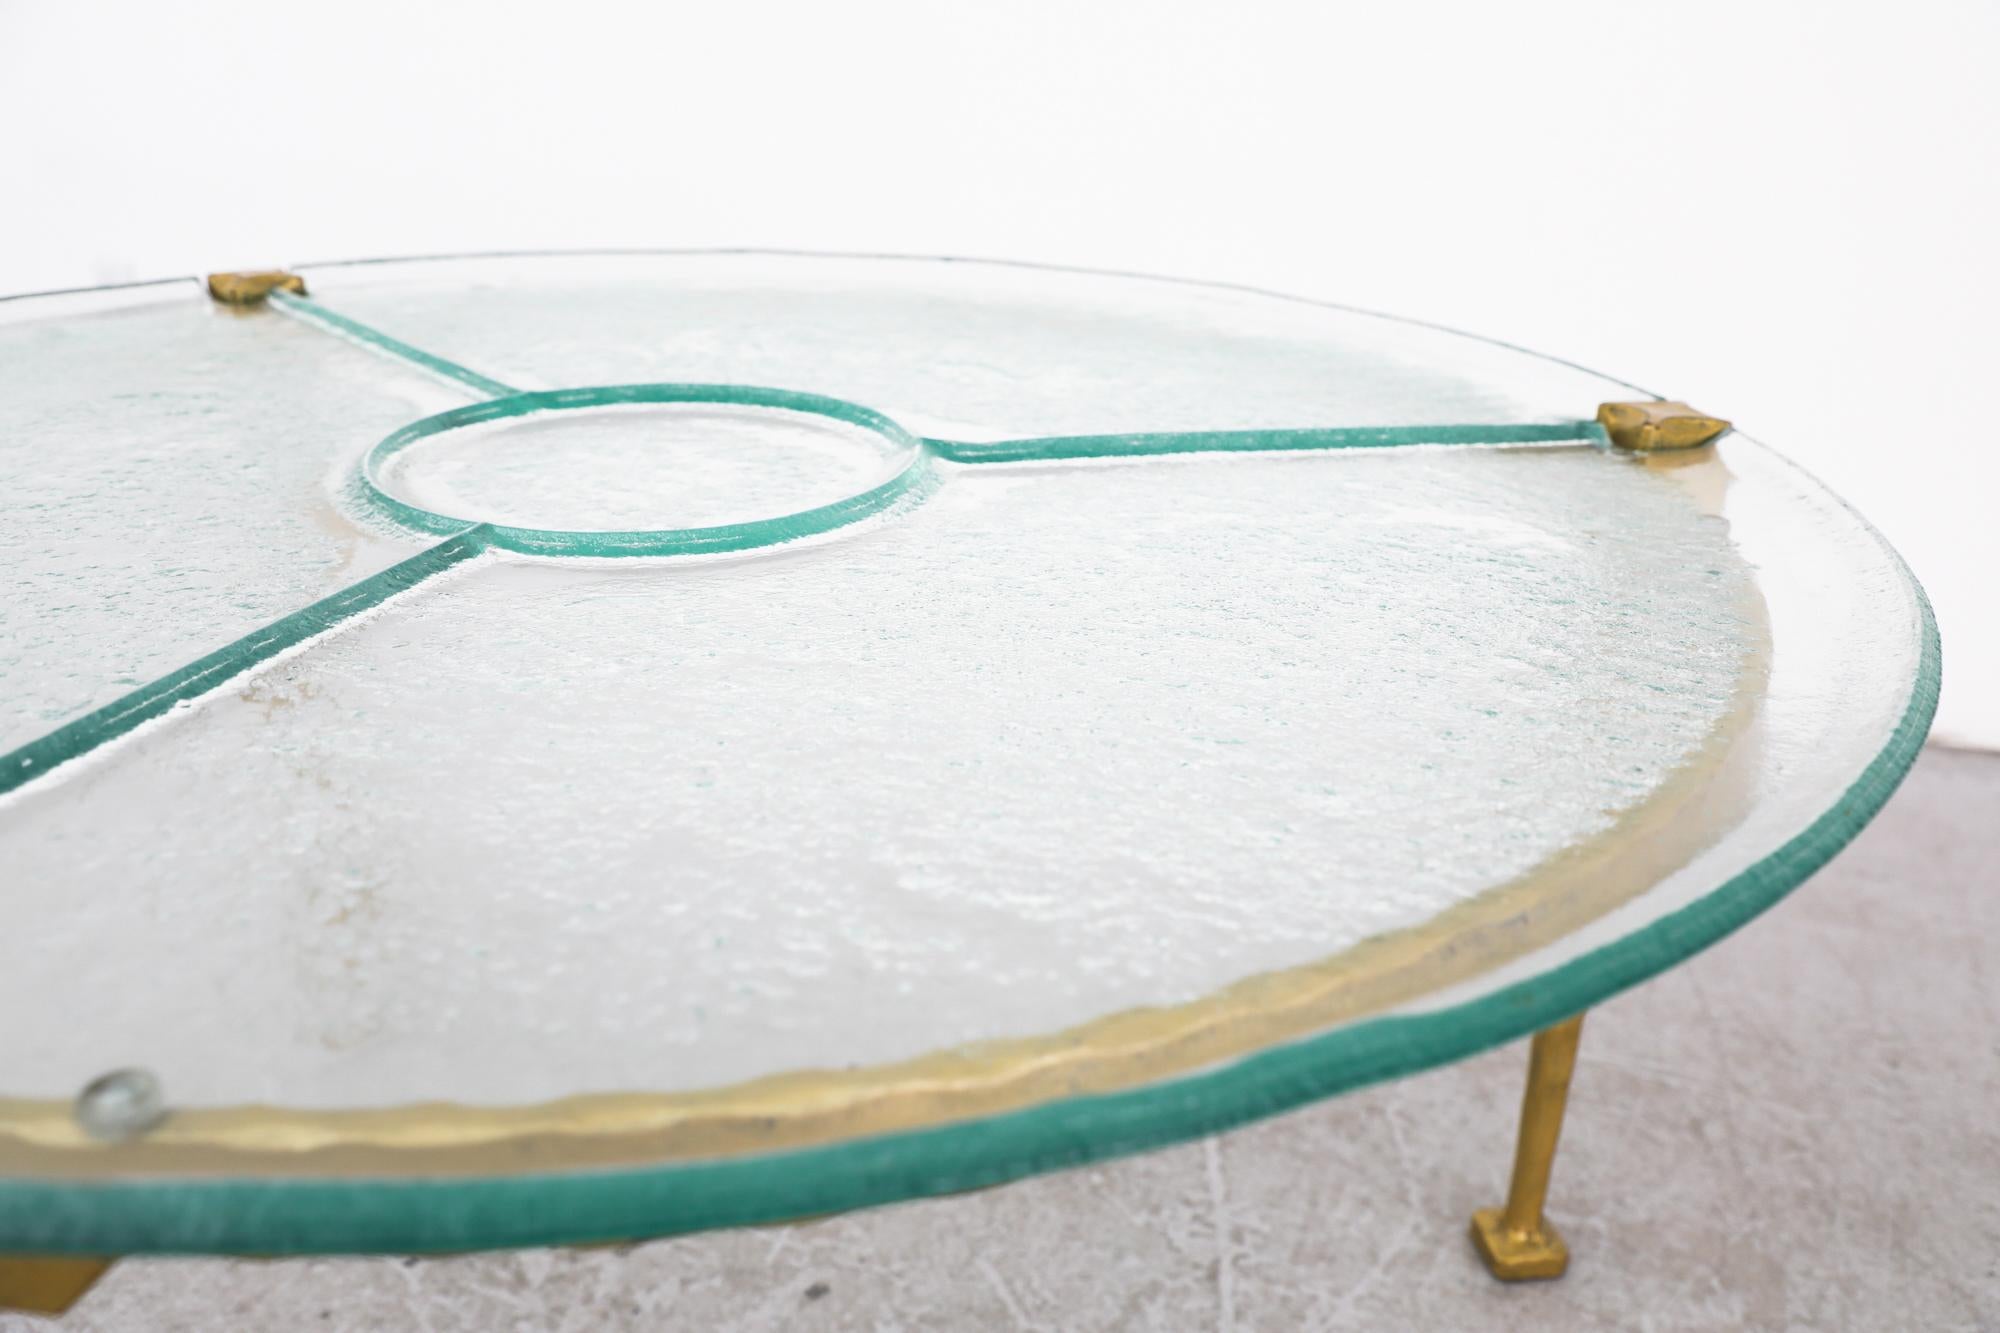 Gold Enameled Lothar Klute Brutalist Coffee Table with Molded Glass Top For Sale 7